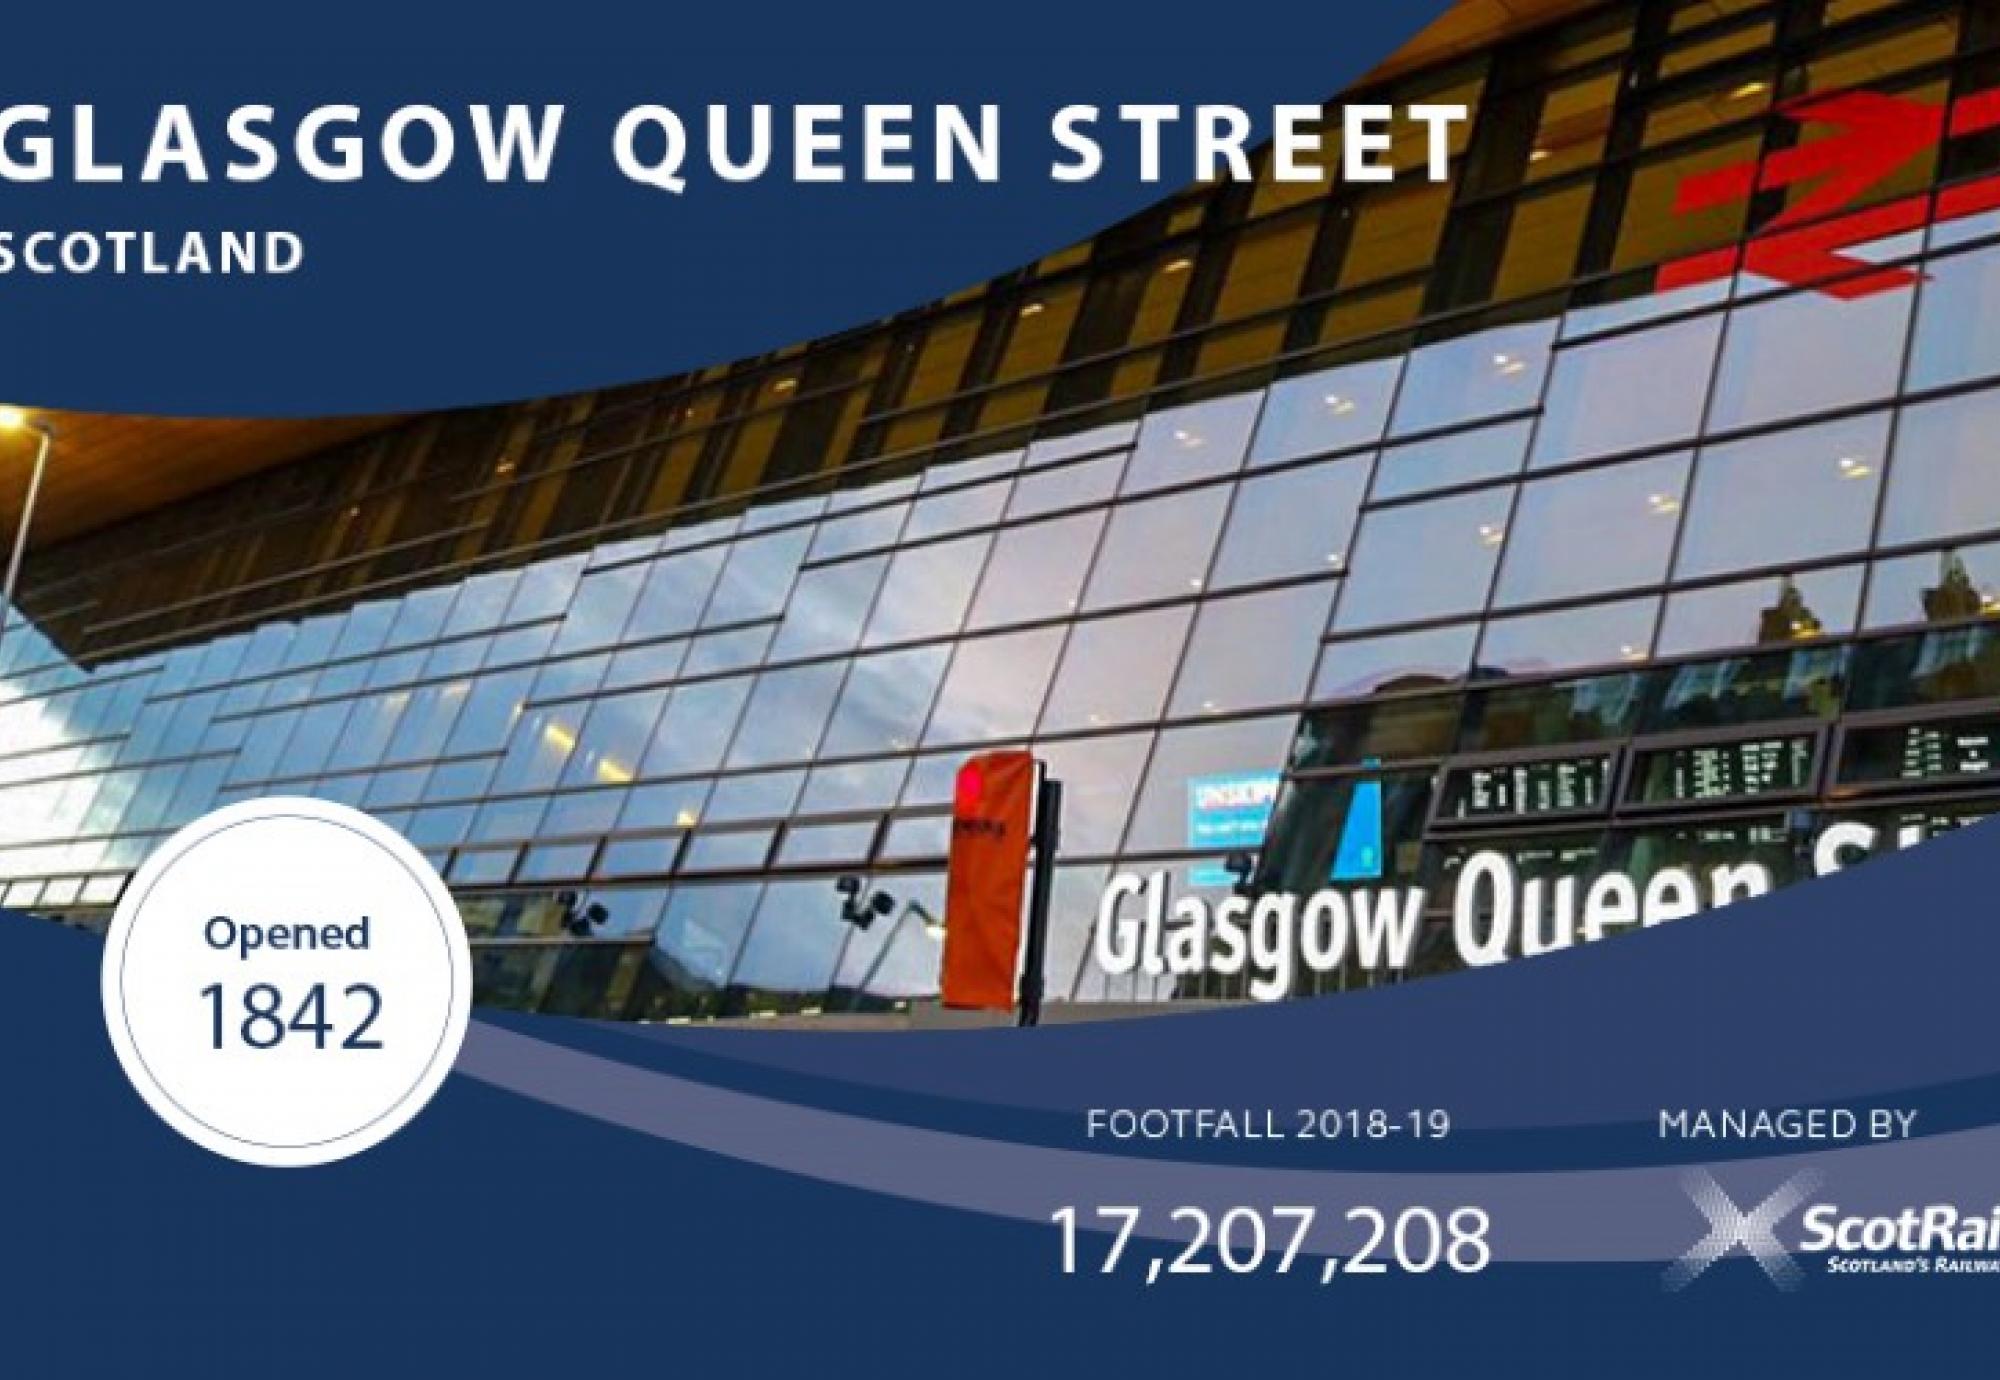 Glasgow Queen Street wins World Cup of Stations 2020 